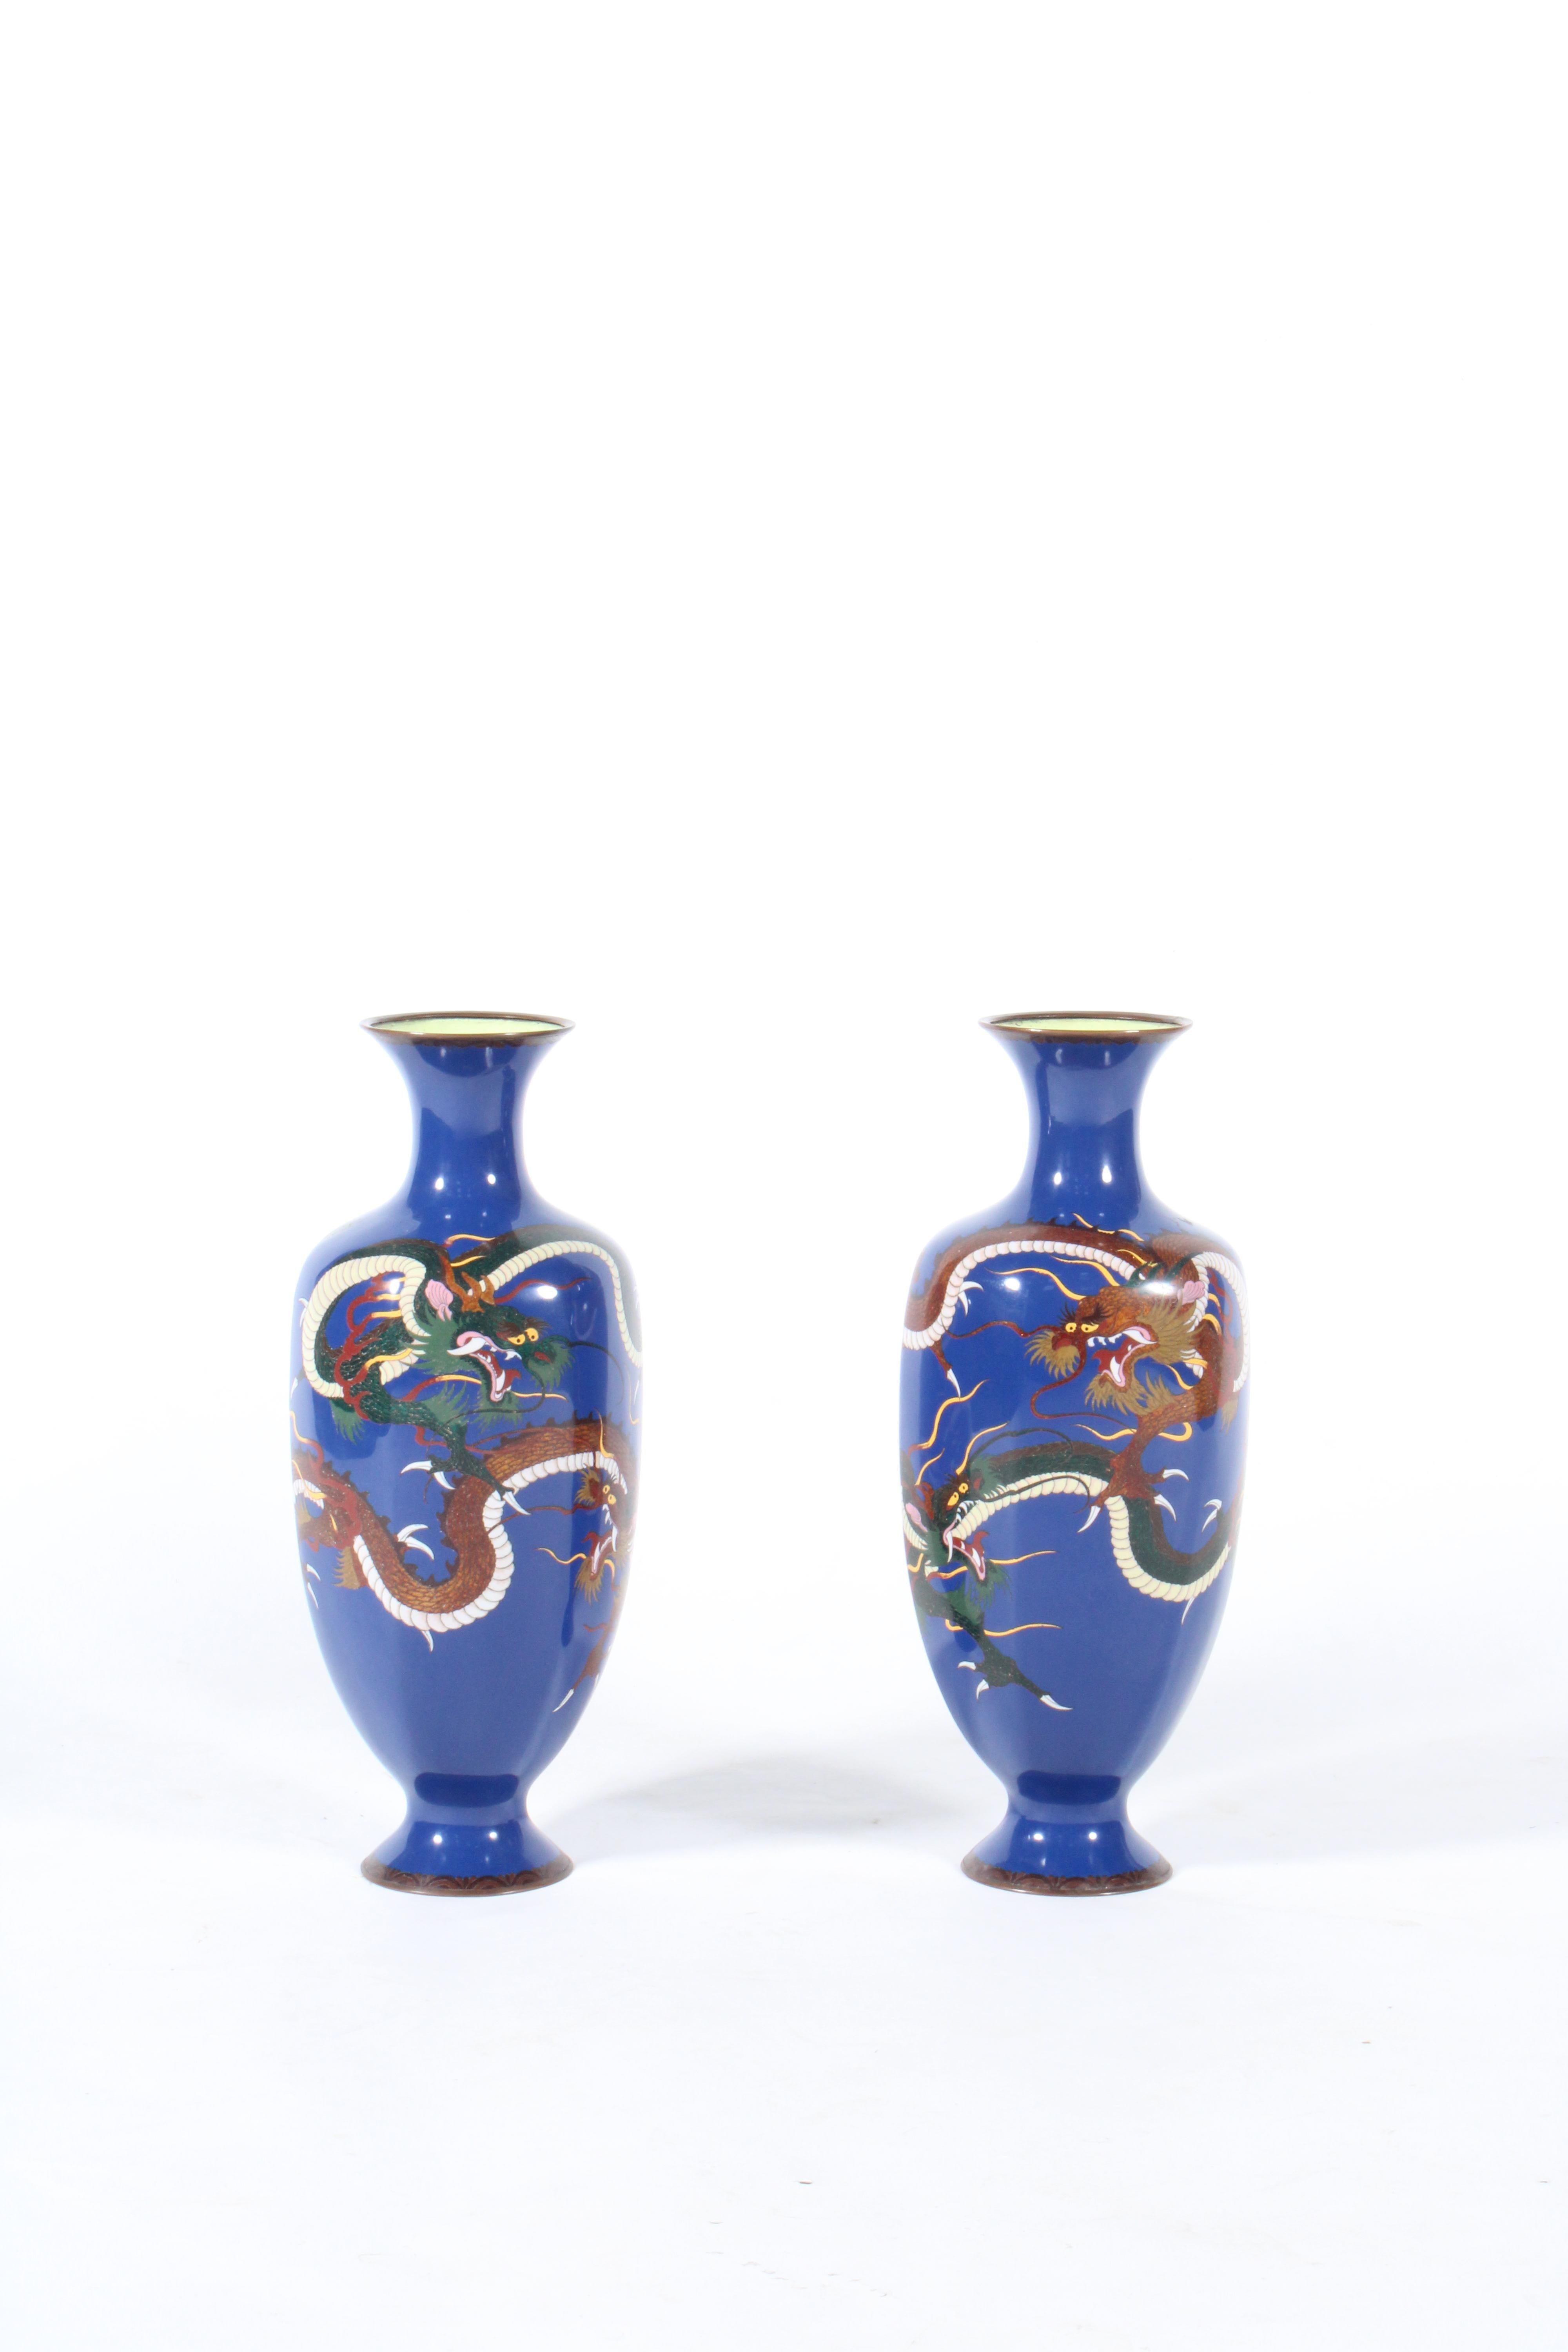 Cloissoné Pair of outstanding decorative mid century Japenese vases *Free Global Delivery